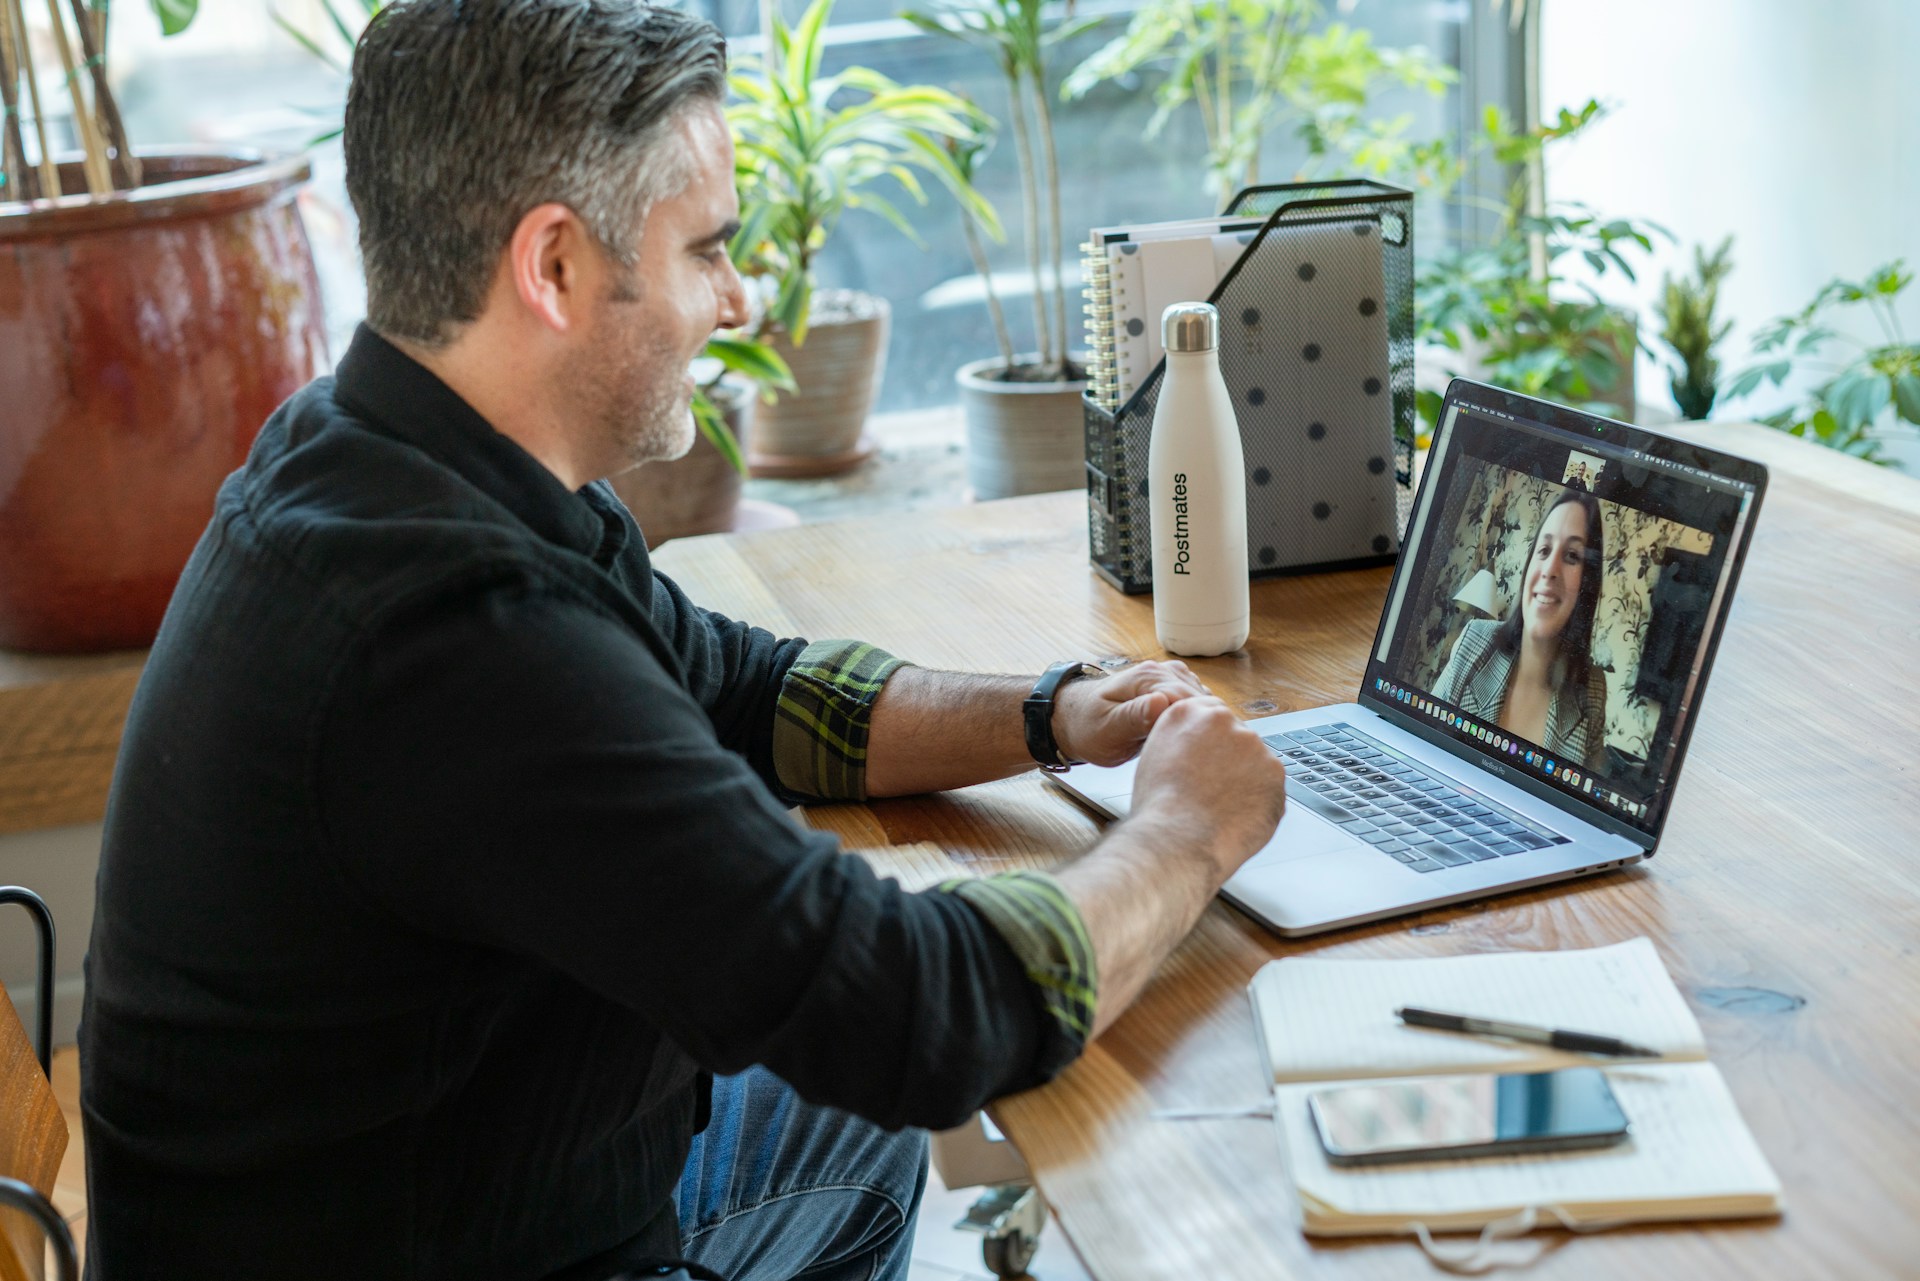 A smiling man talking to a lady on a video call on his laptop.